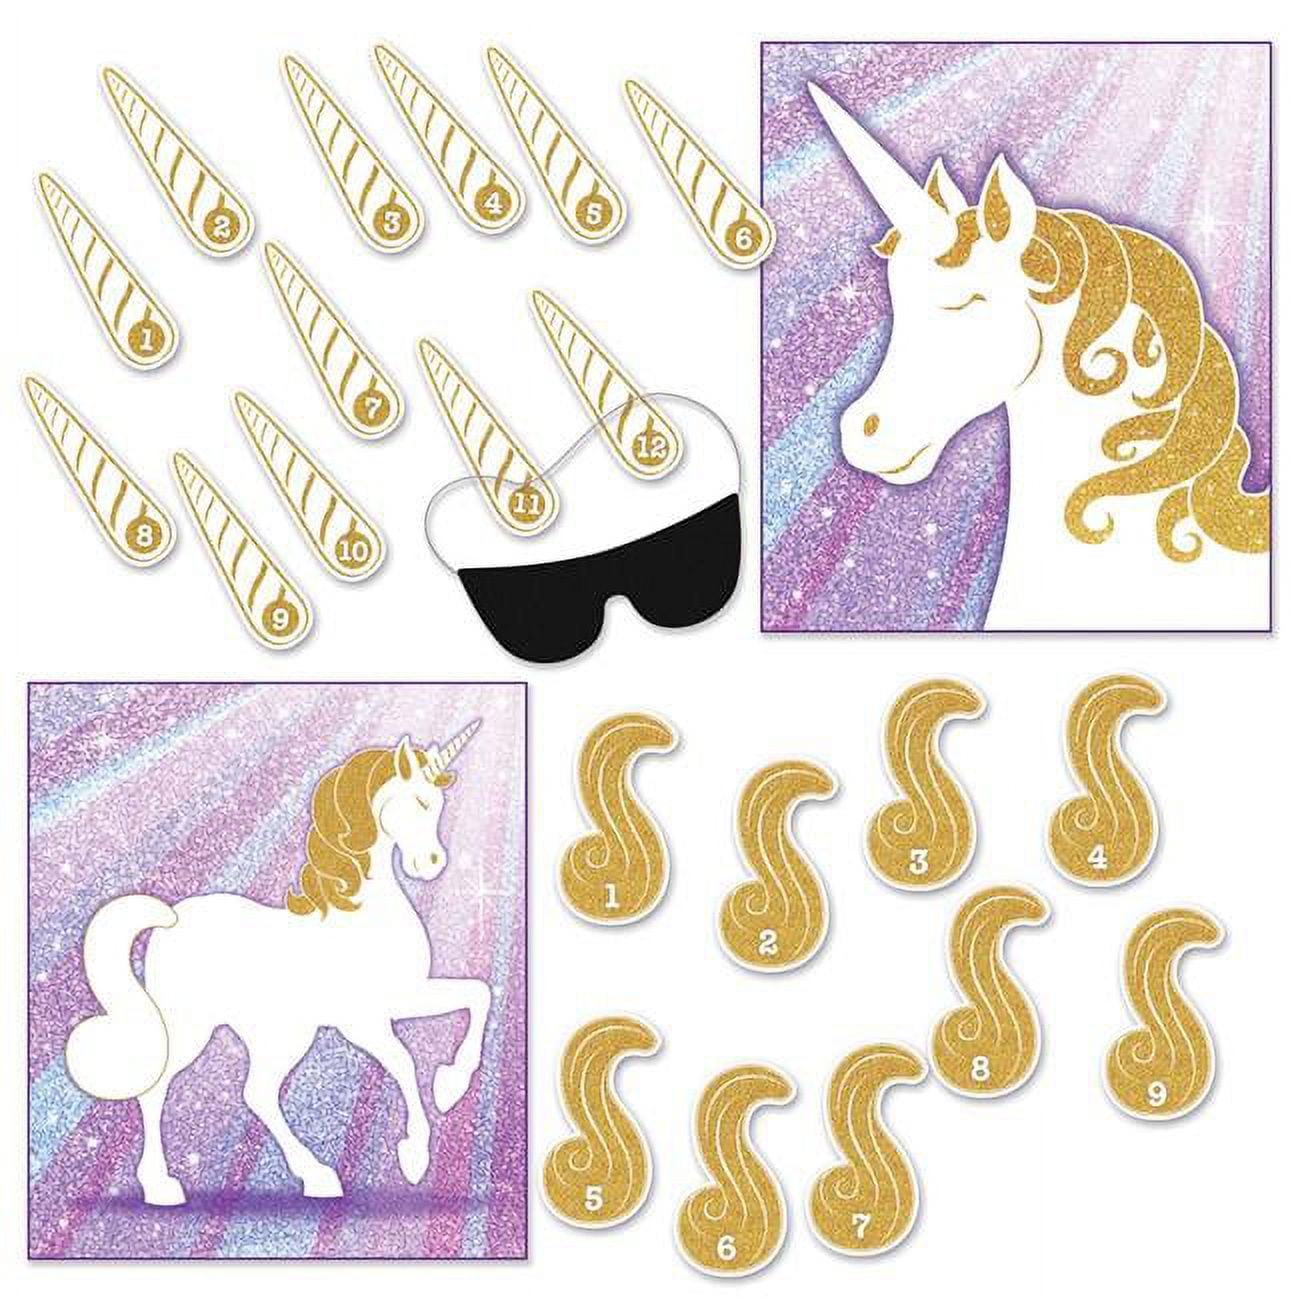 Picture of Beistle 60860 19.25 x 16.75 in. Unicorn Party Games - Pack of 24